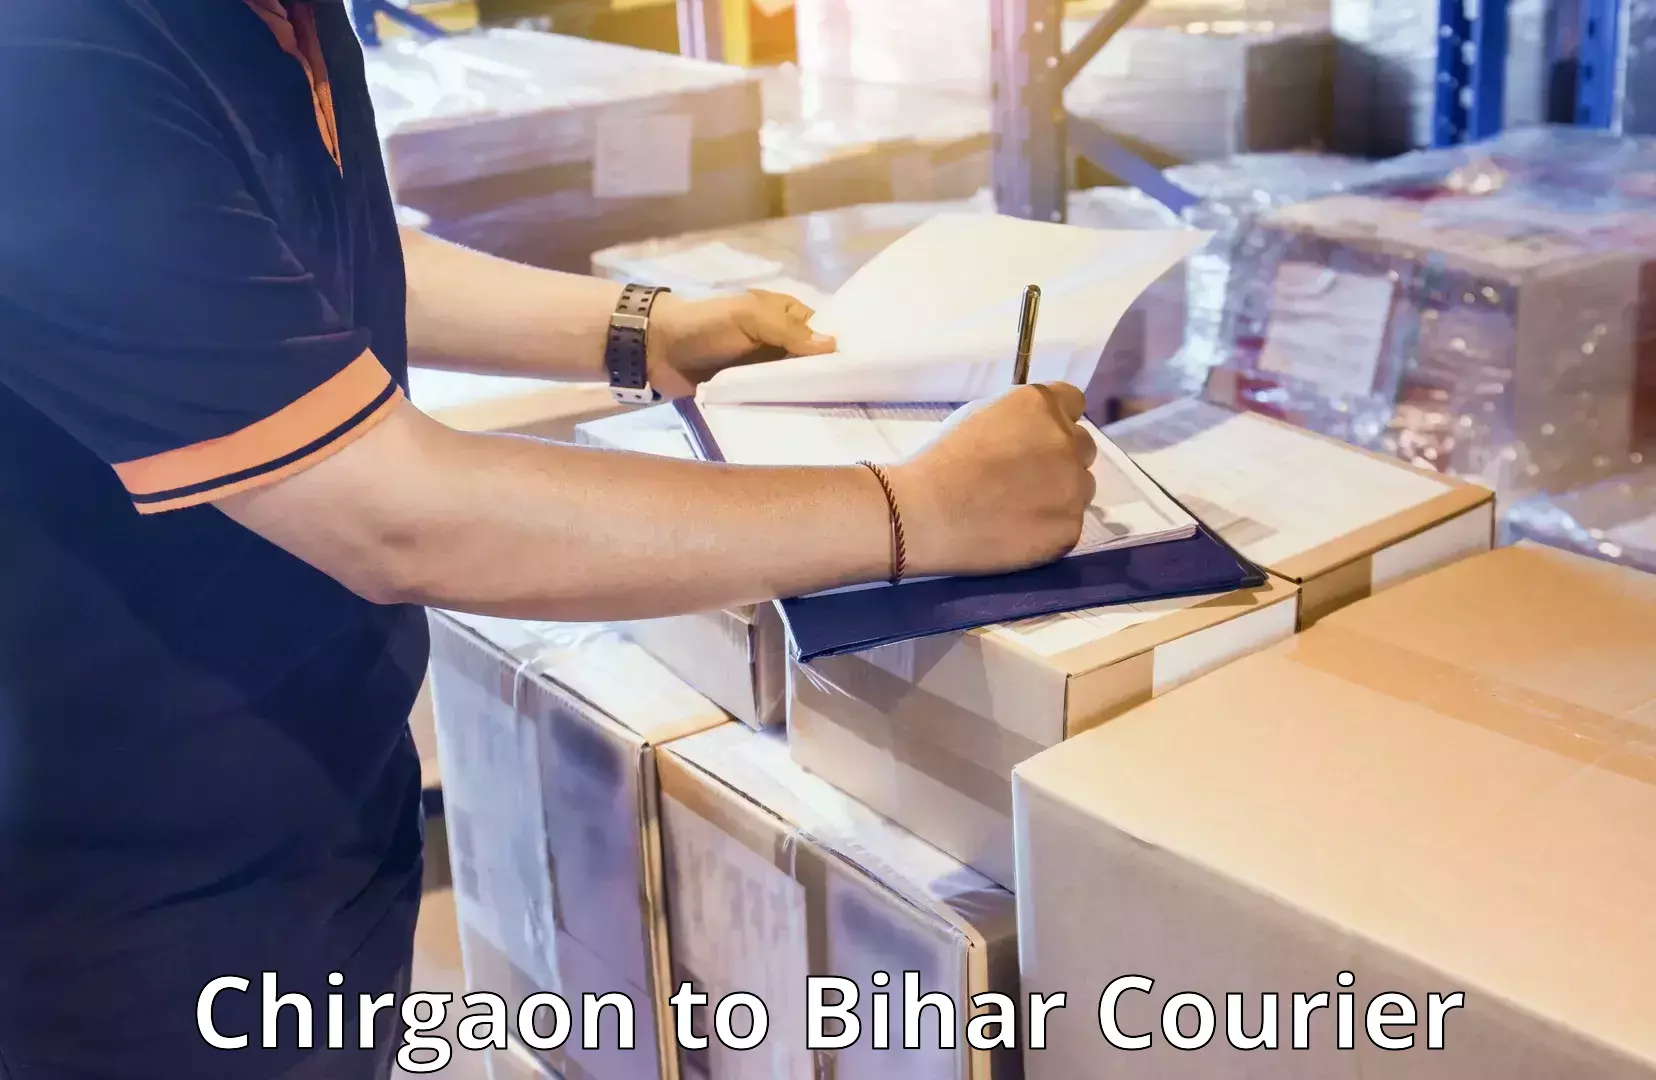 Luggage shipment specialists Chirgaon to Bihar